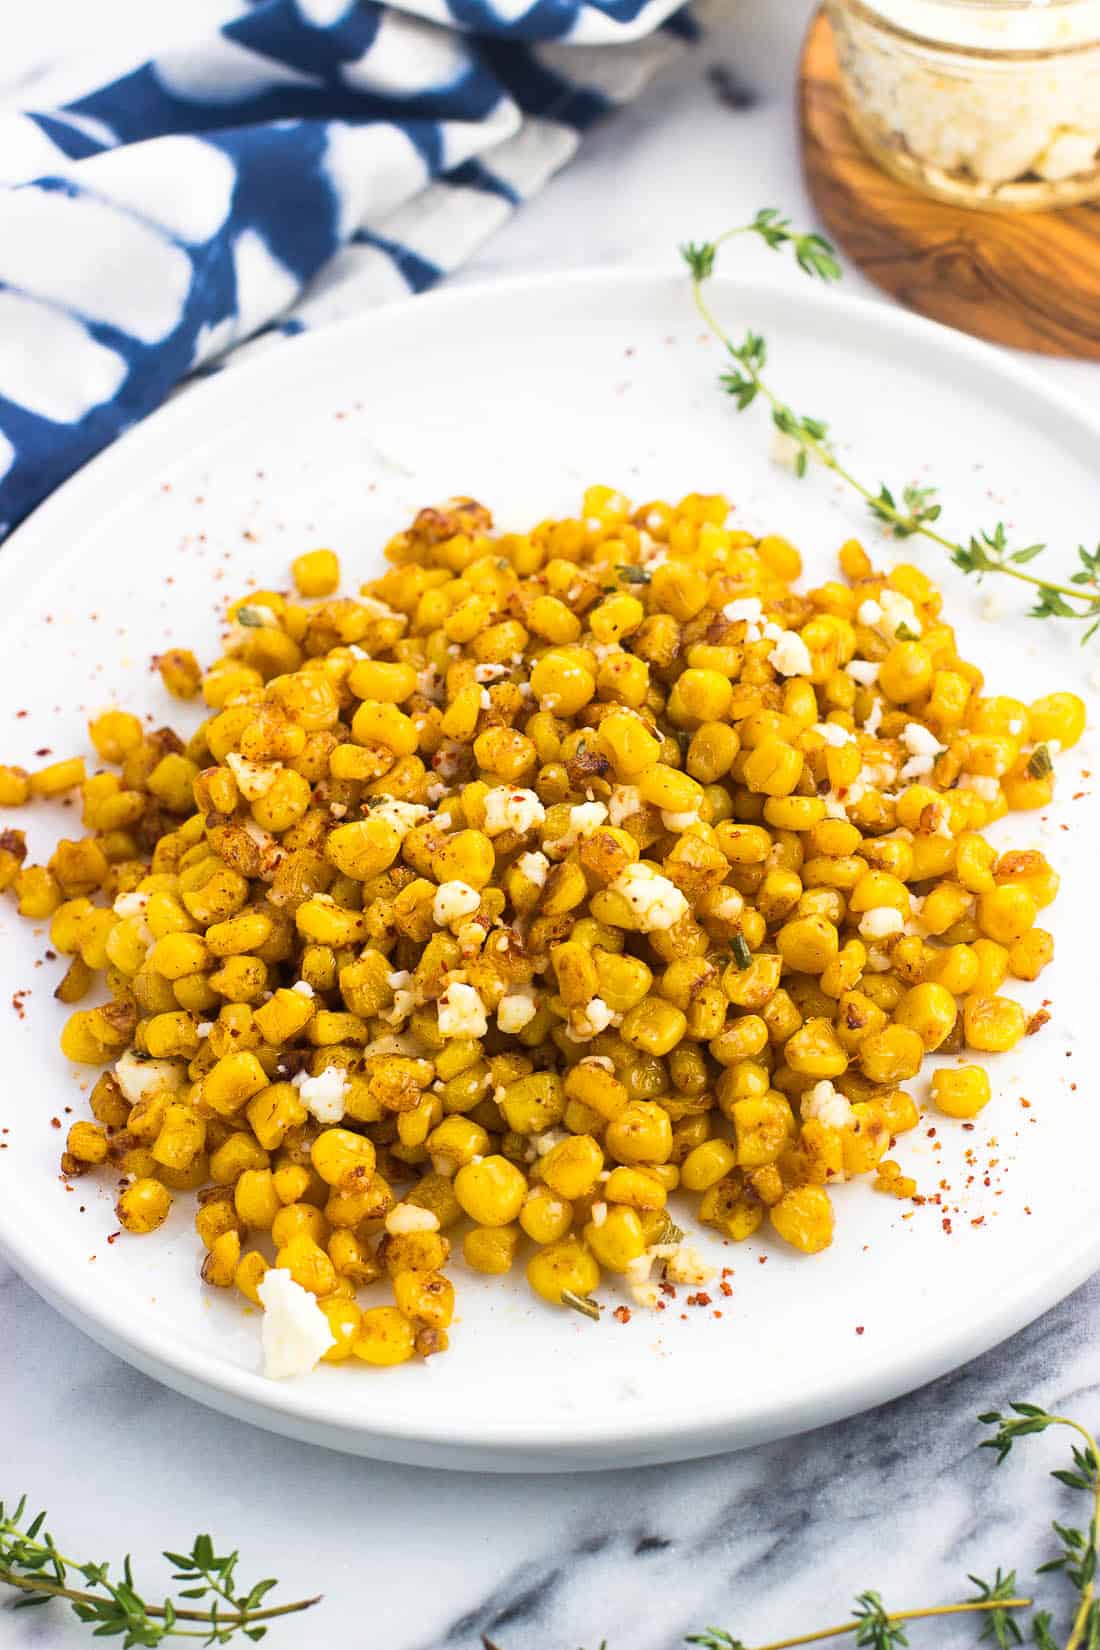 A plate of skillet roasted corn